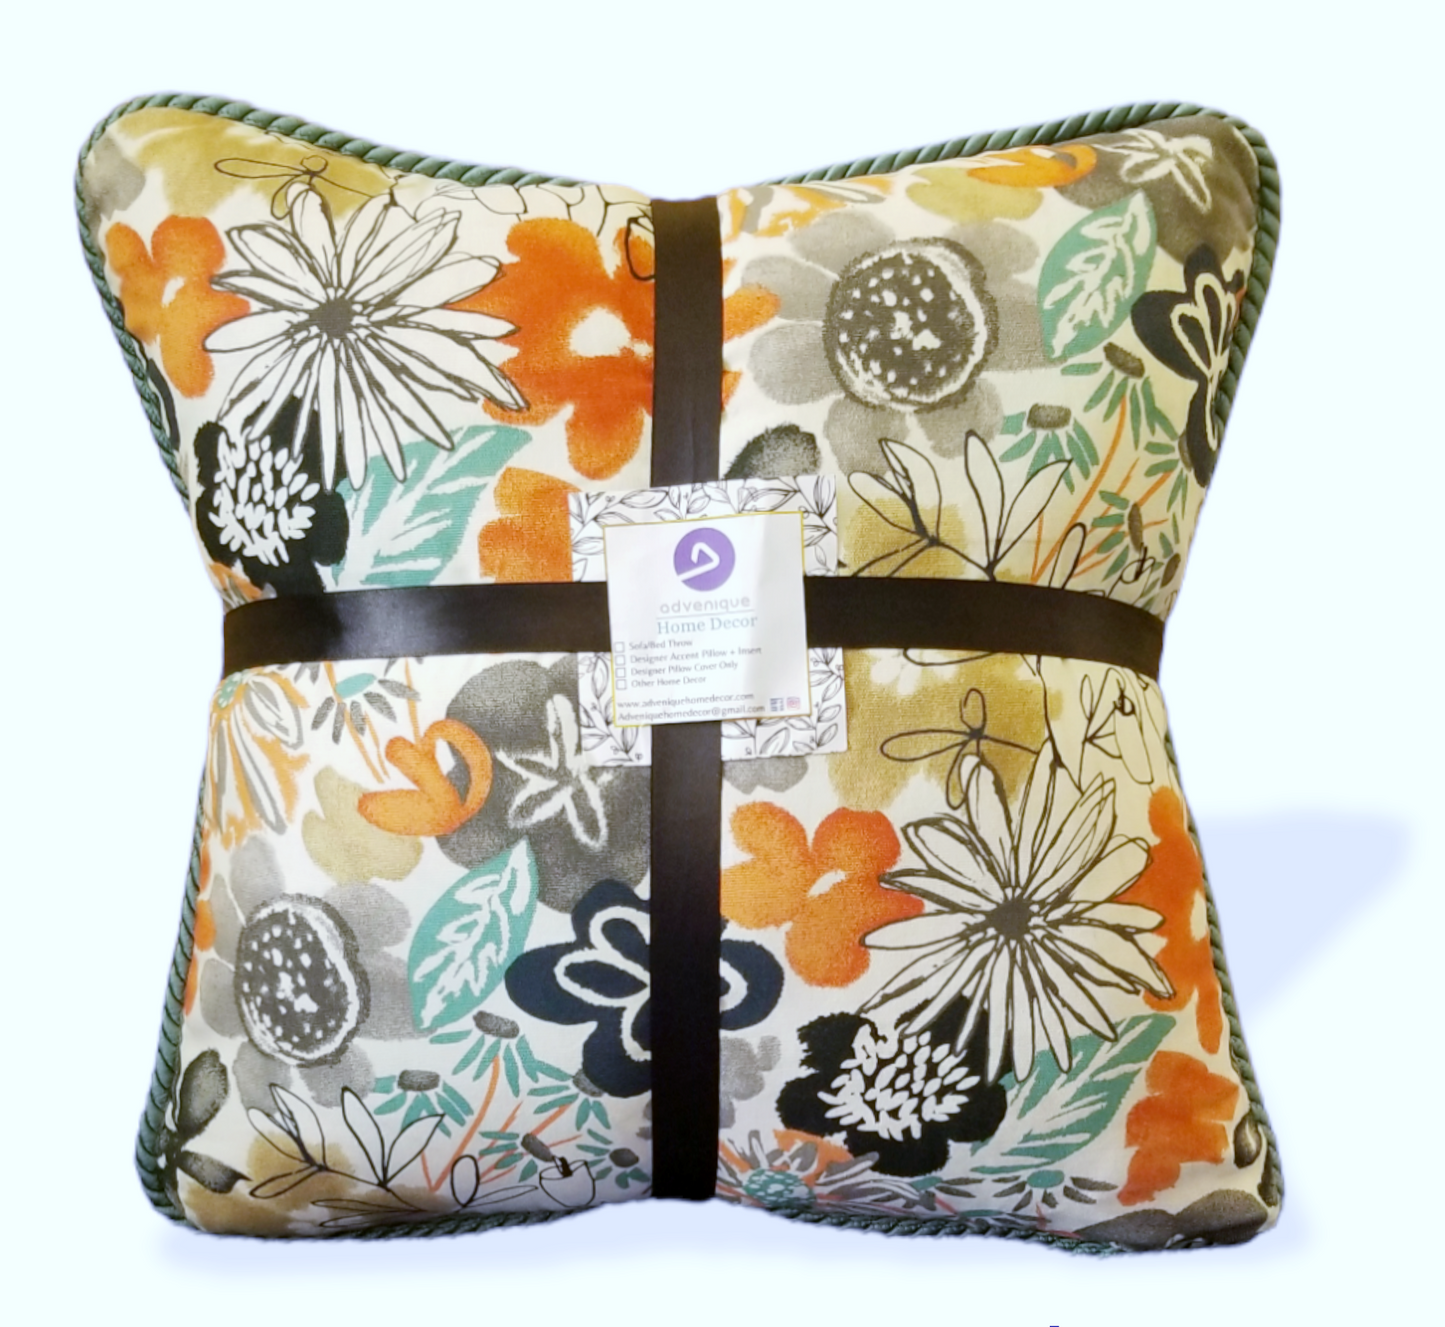 Shop Designer pillows. Your source for throw pillows  and cushions.  Get all your high end decorative throw pillows and cushions at advenique home decor.  All top 2022 pillow designs.